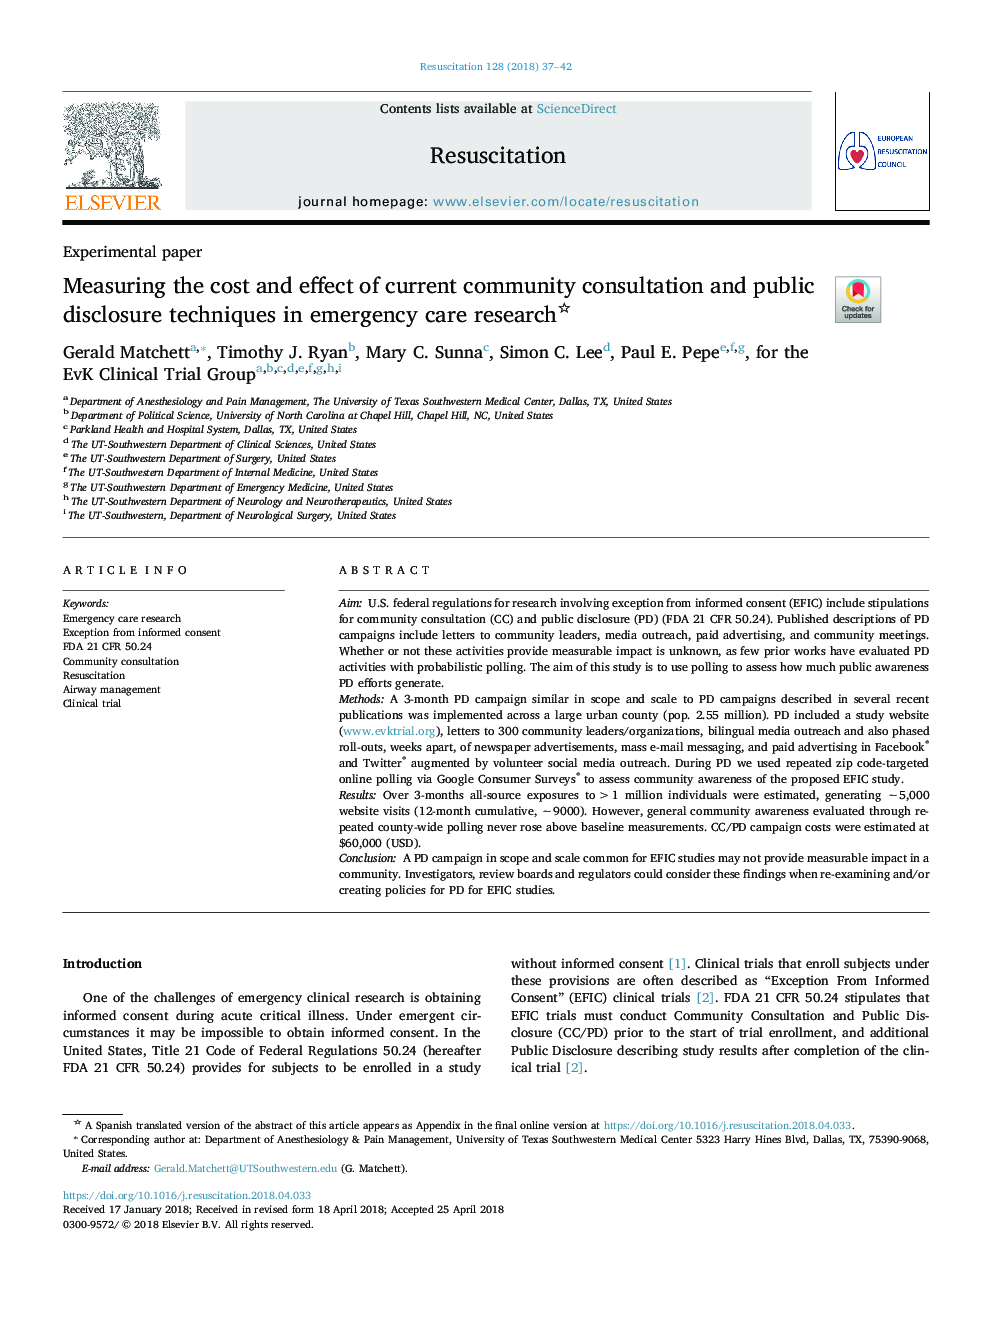 Measuring the cost and effect of current community consultation and public disclosure techniques in emergency care research